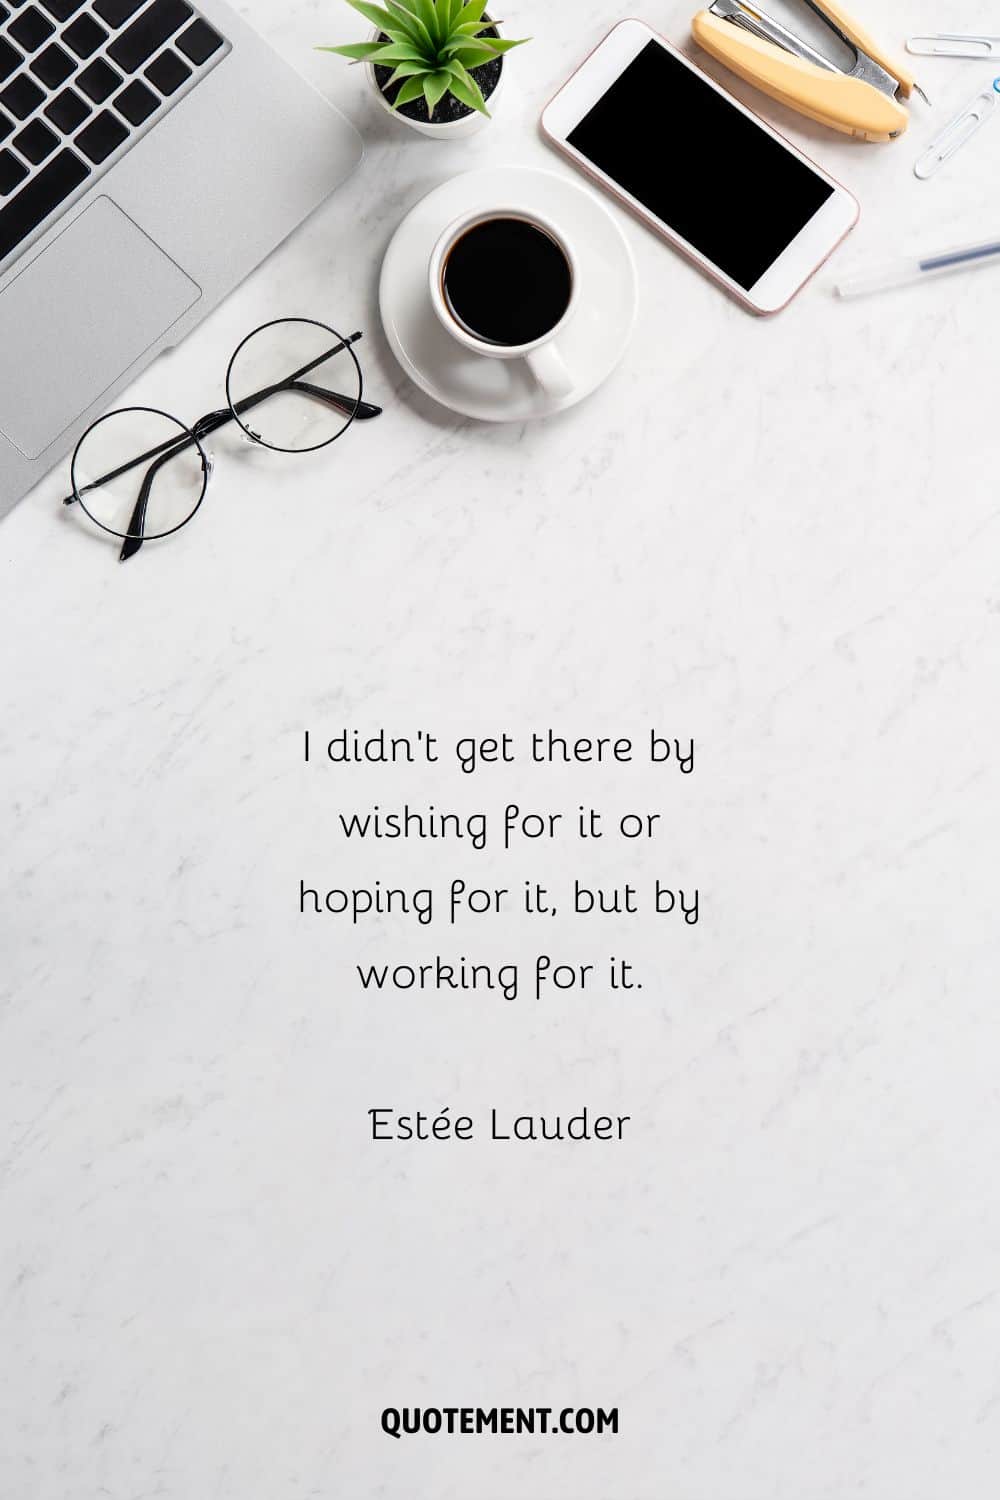 “I didn’t get there by wishing for it or hoping for it, but by working for it.” — Estée Lauder